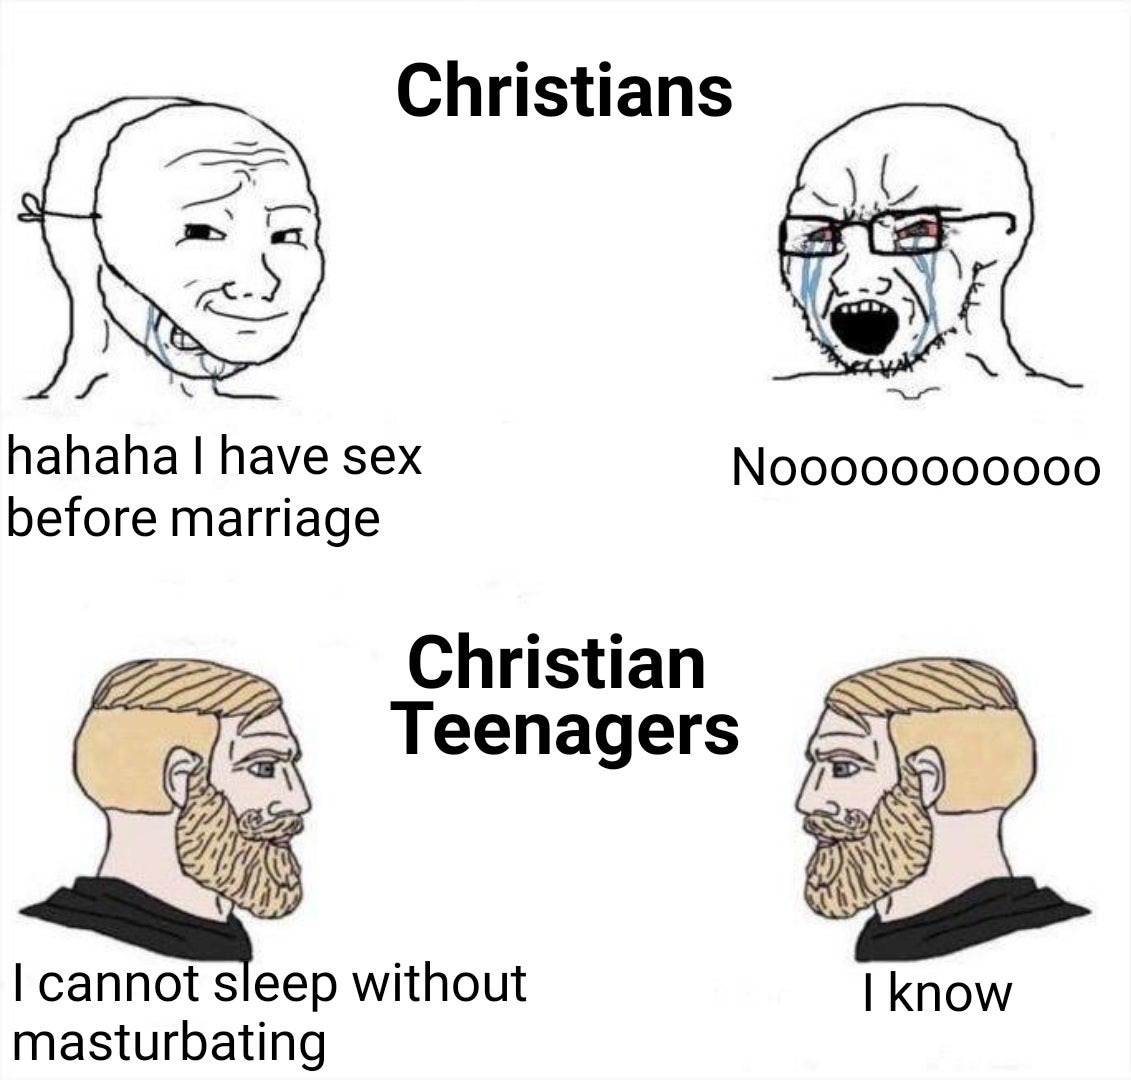 other game leaks meme - Christians Noooo0000000 hahaha I have sex before marriage Christian Teenagers I cannot sleep without masturbating I know